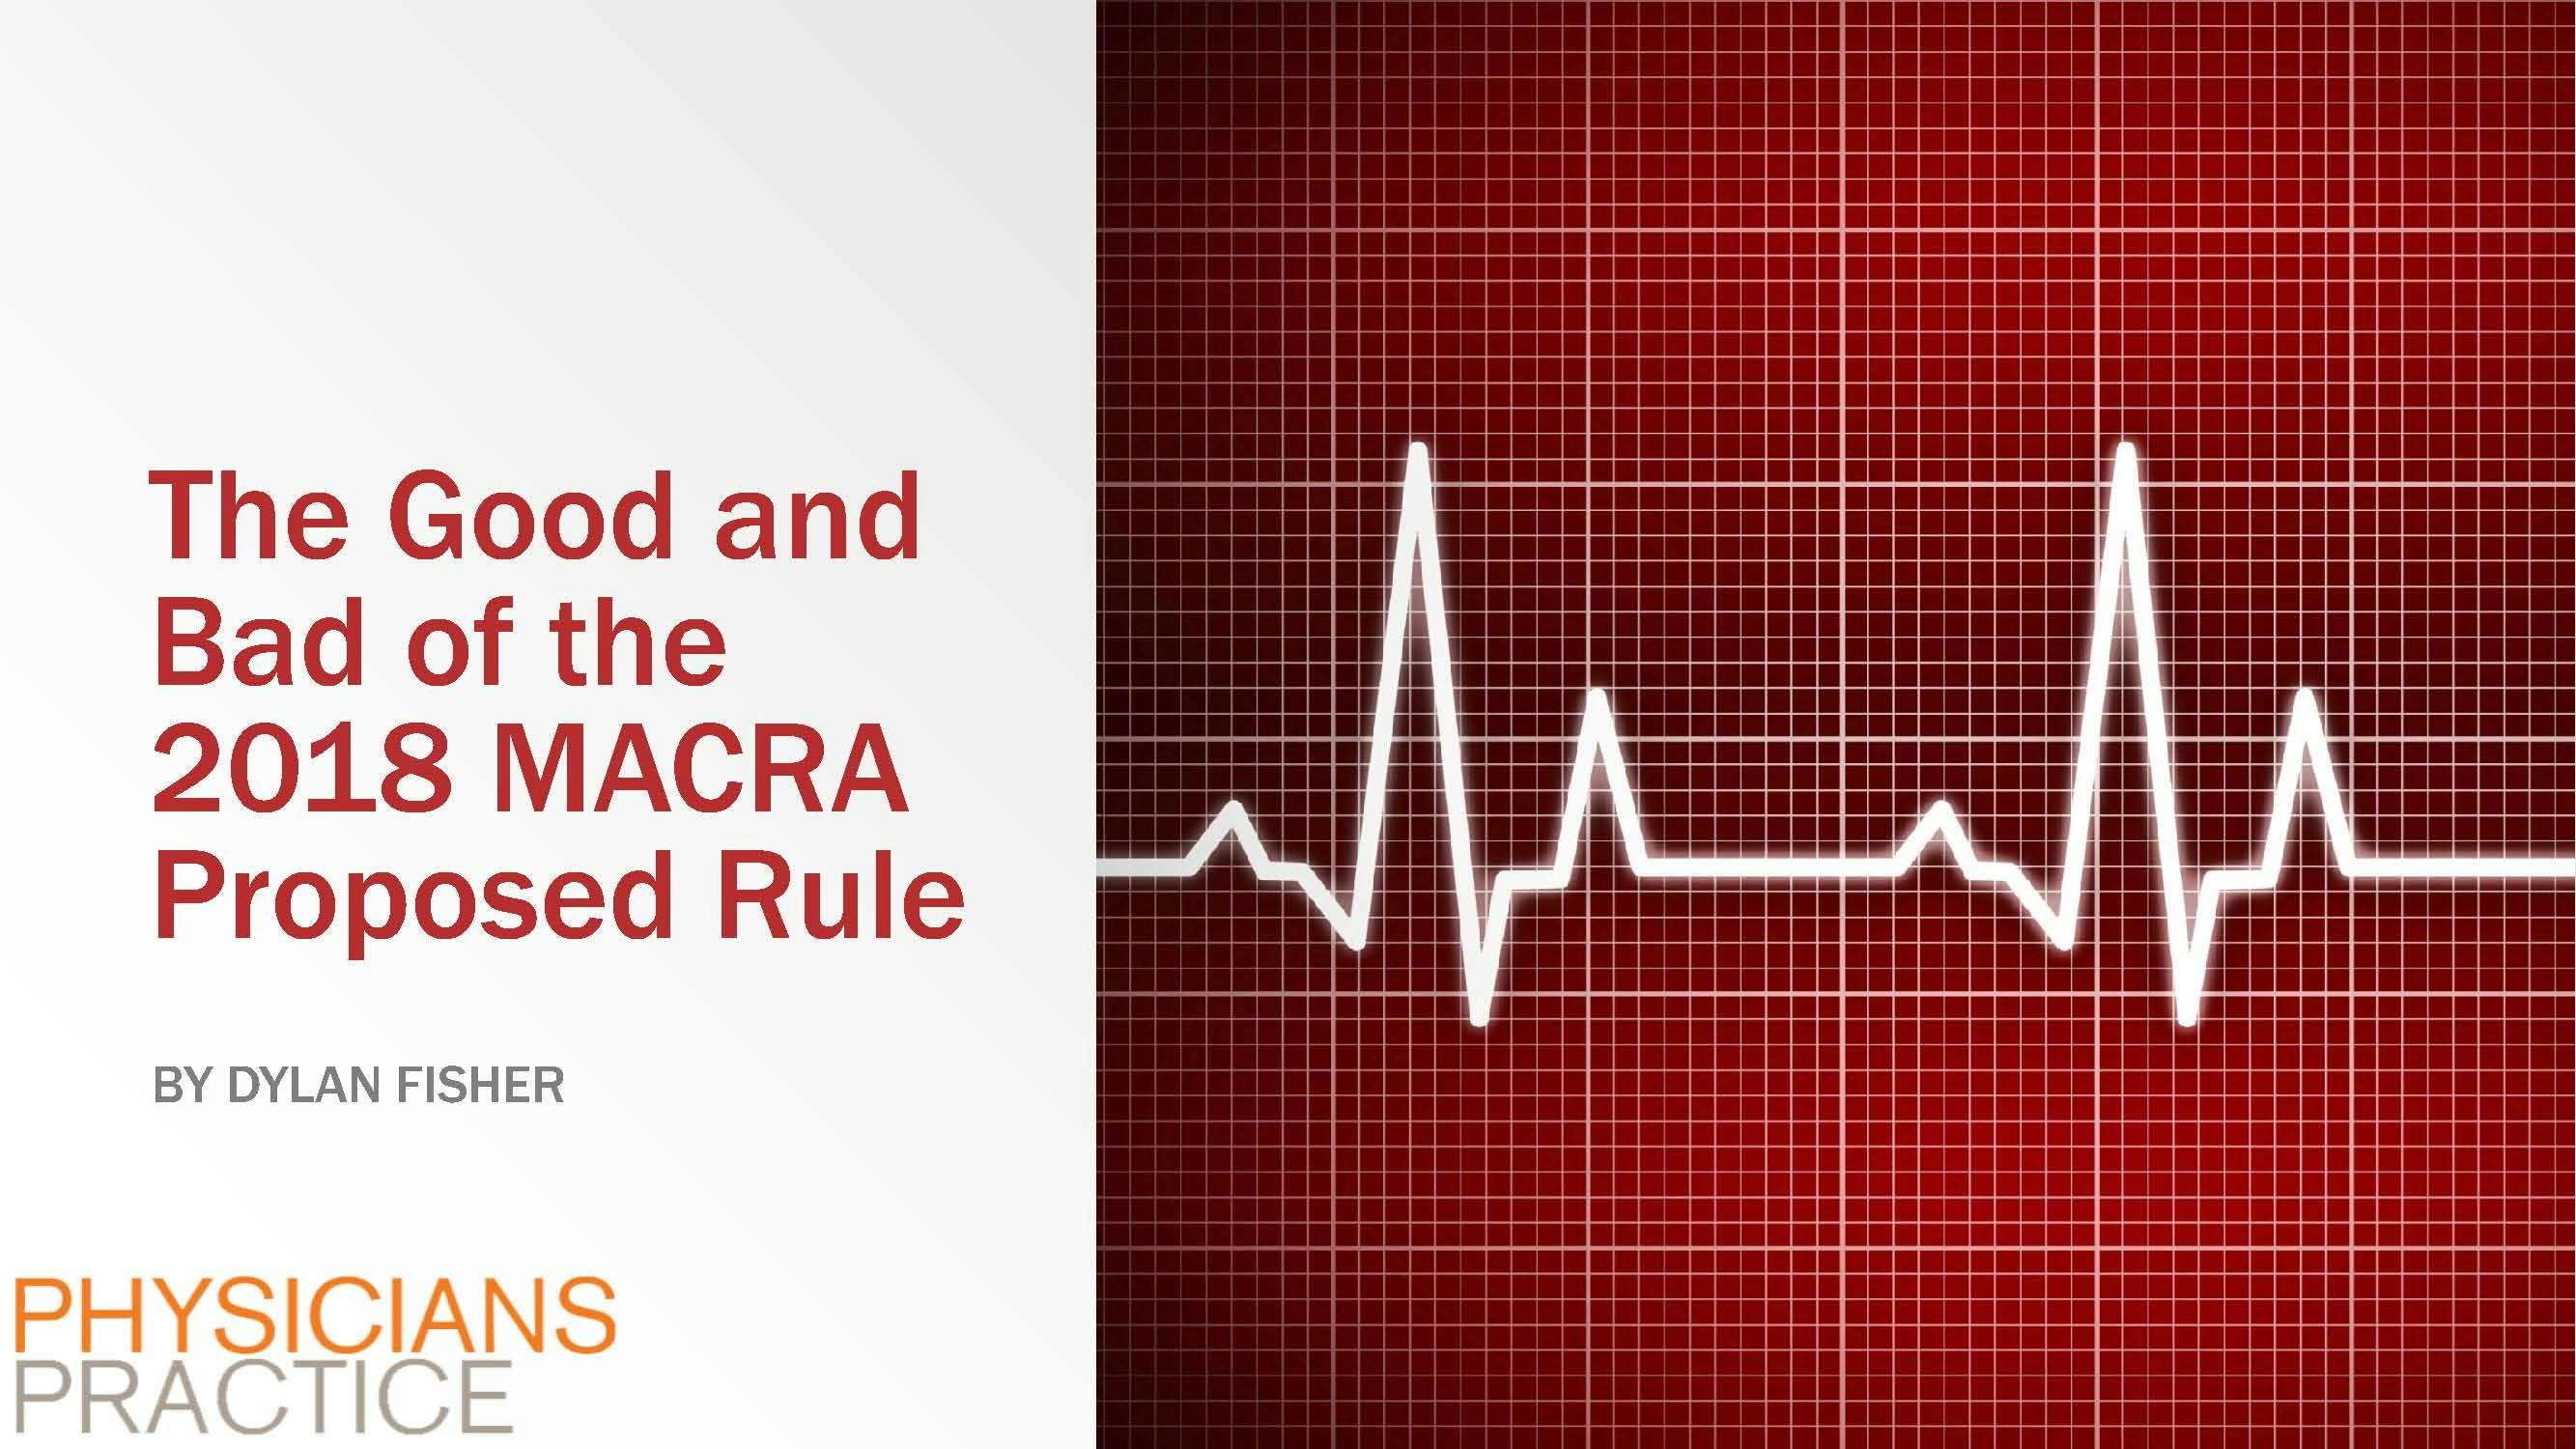 The Good and Bad of the 2018 MACRA Proposed Rule